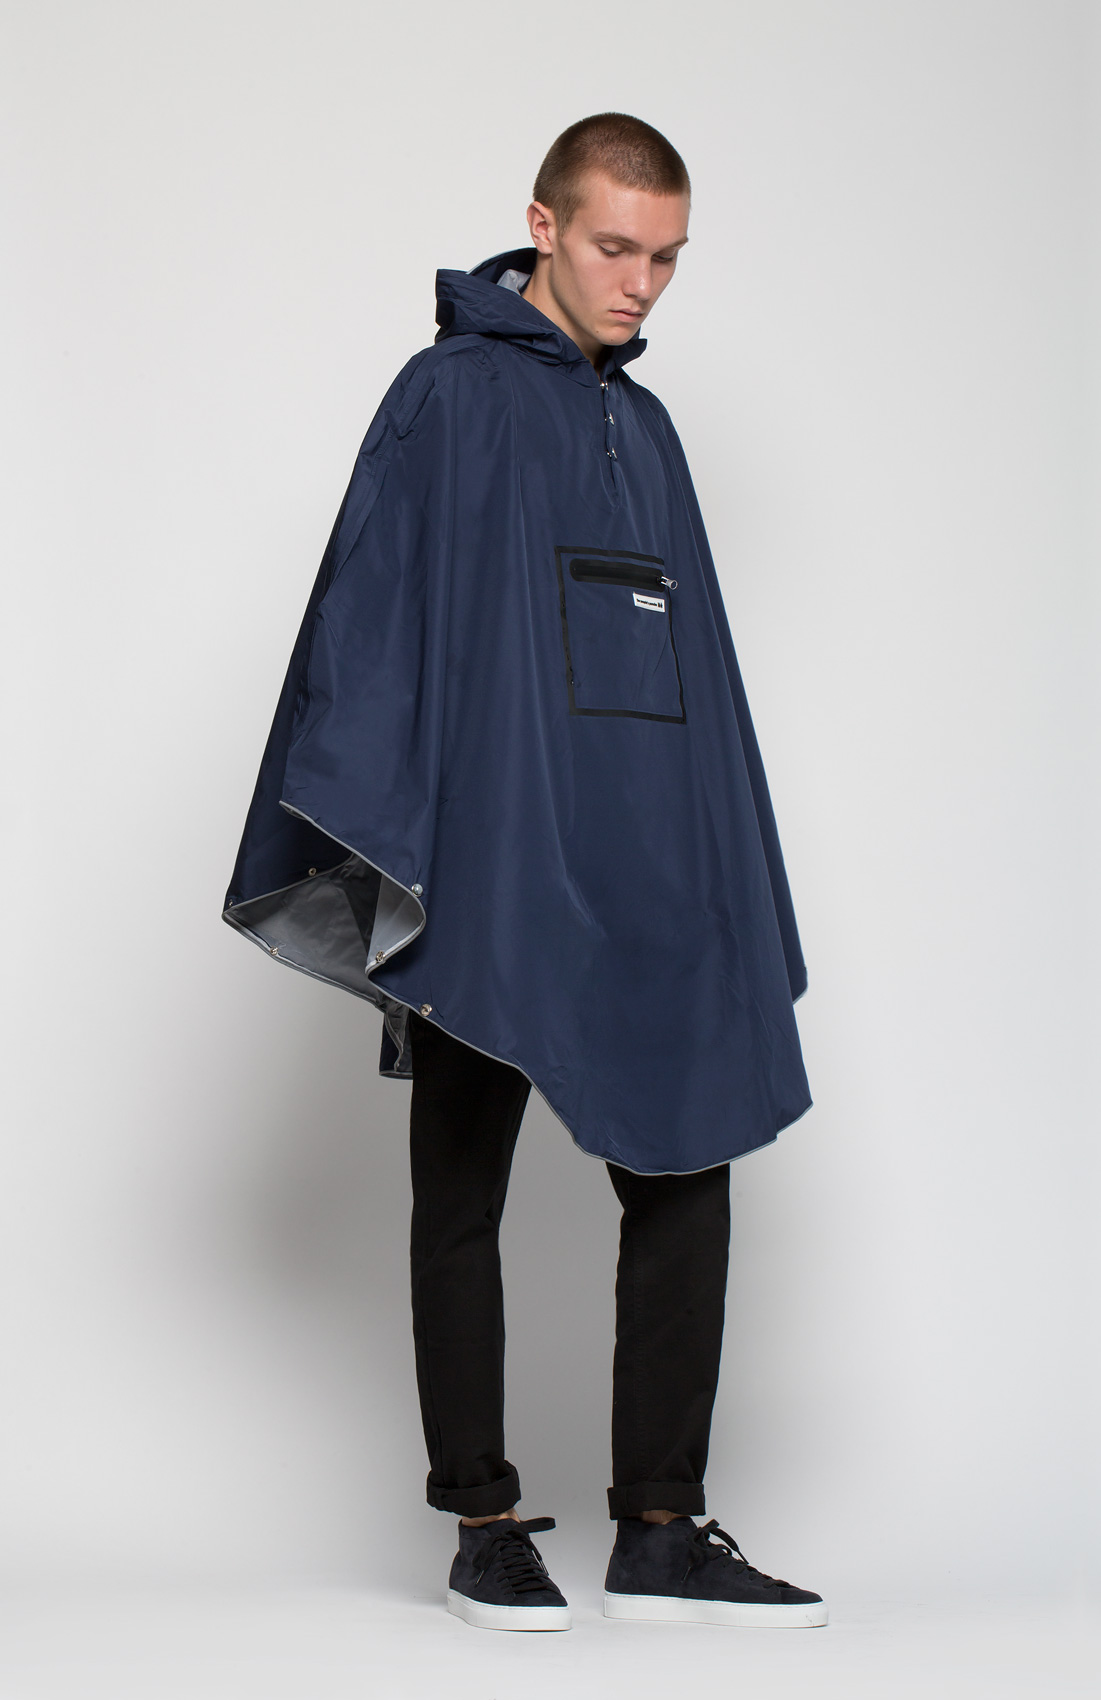 How To Look Good In The Rain Courtesy Of The People's Poncho | OPUMO  Magazine